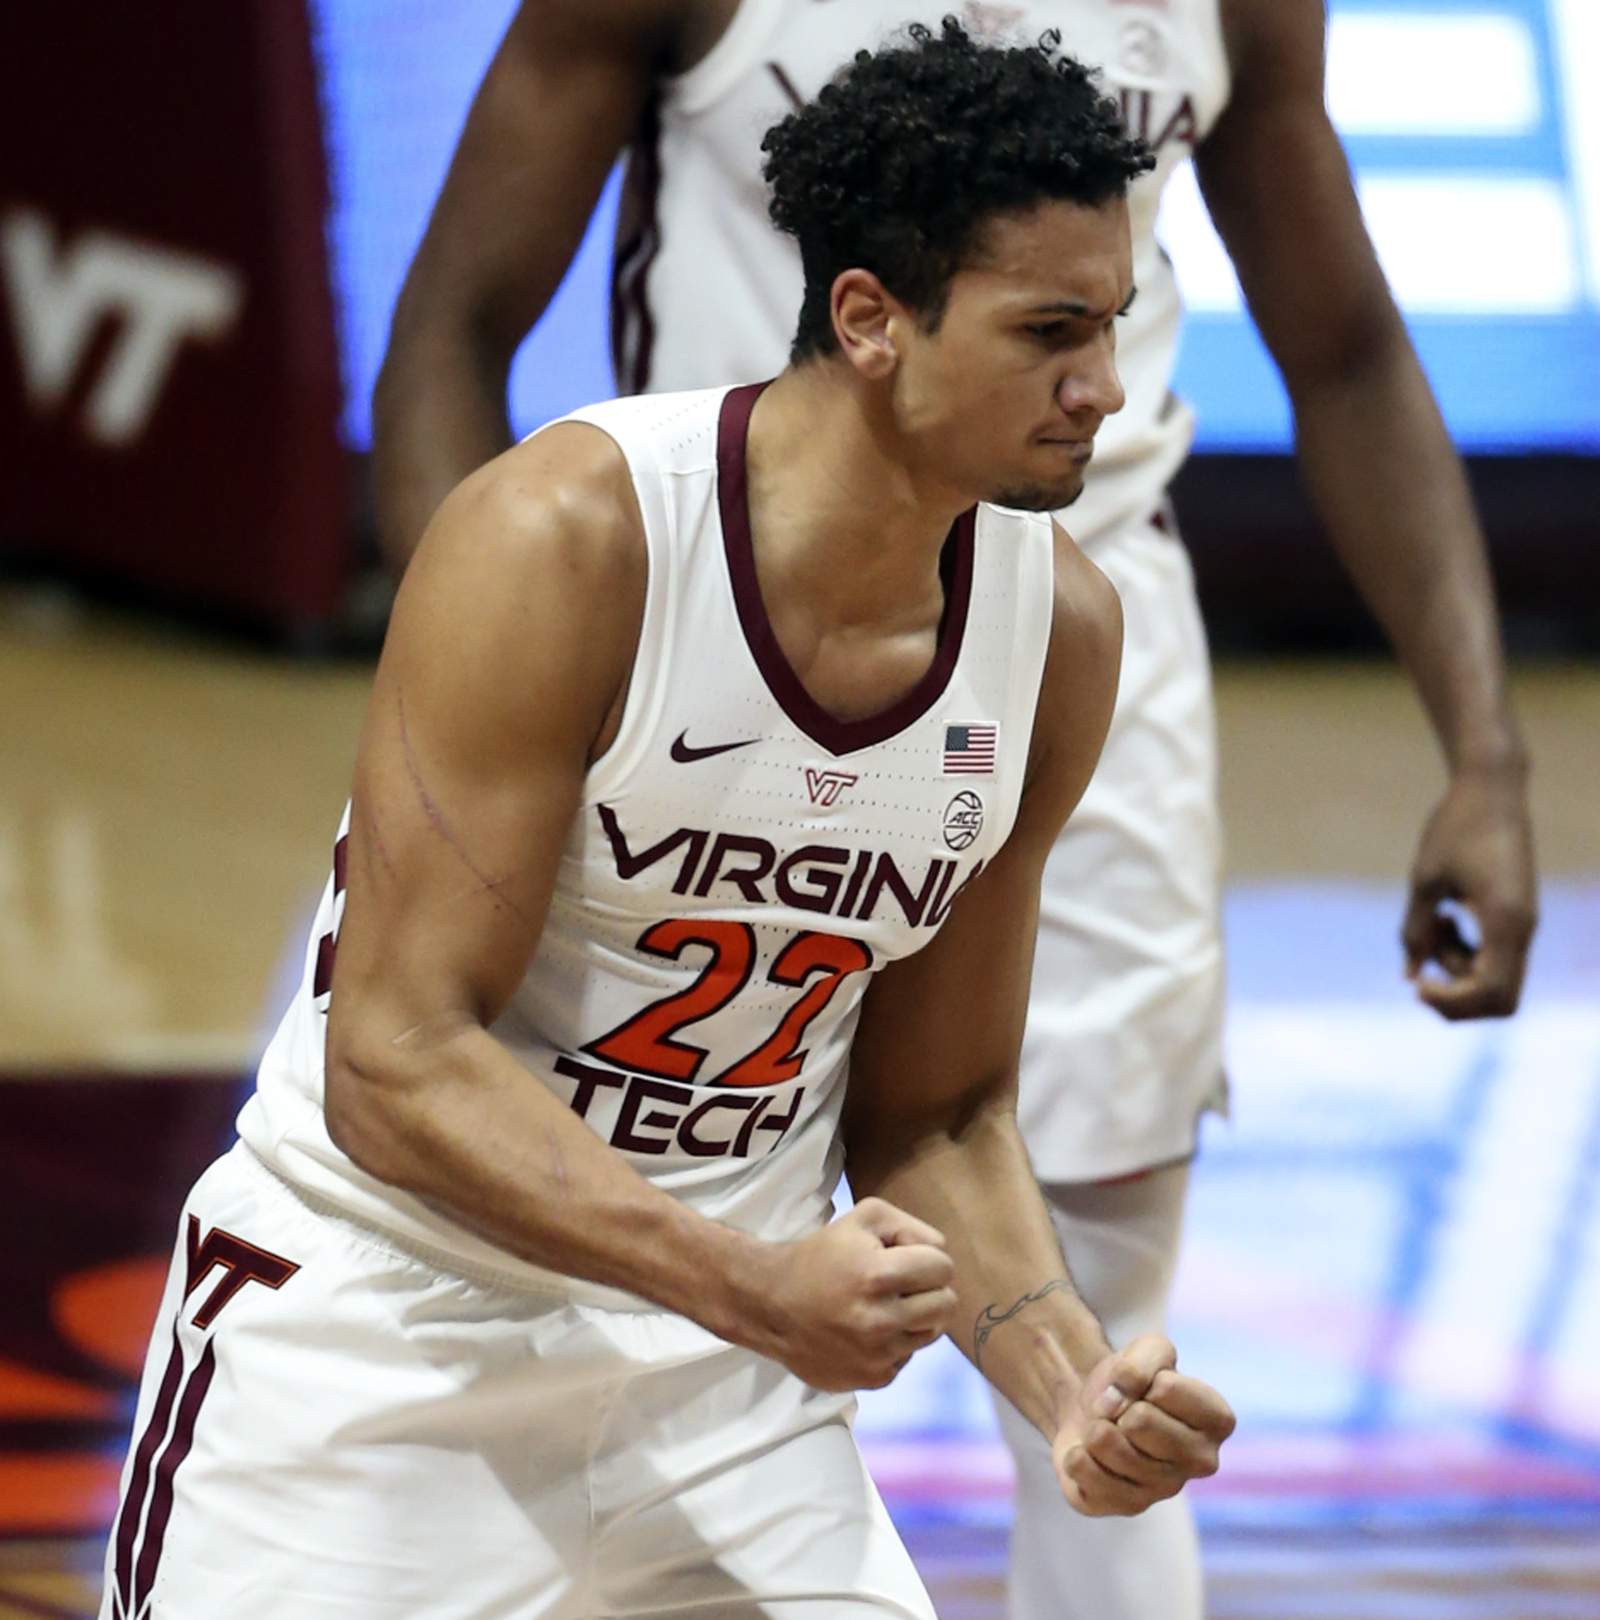 ACC college basketball: Jalen Cone leads Virginia Tech over Syracuse